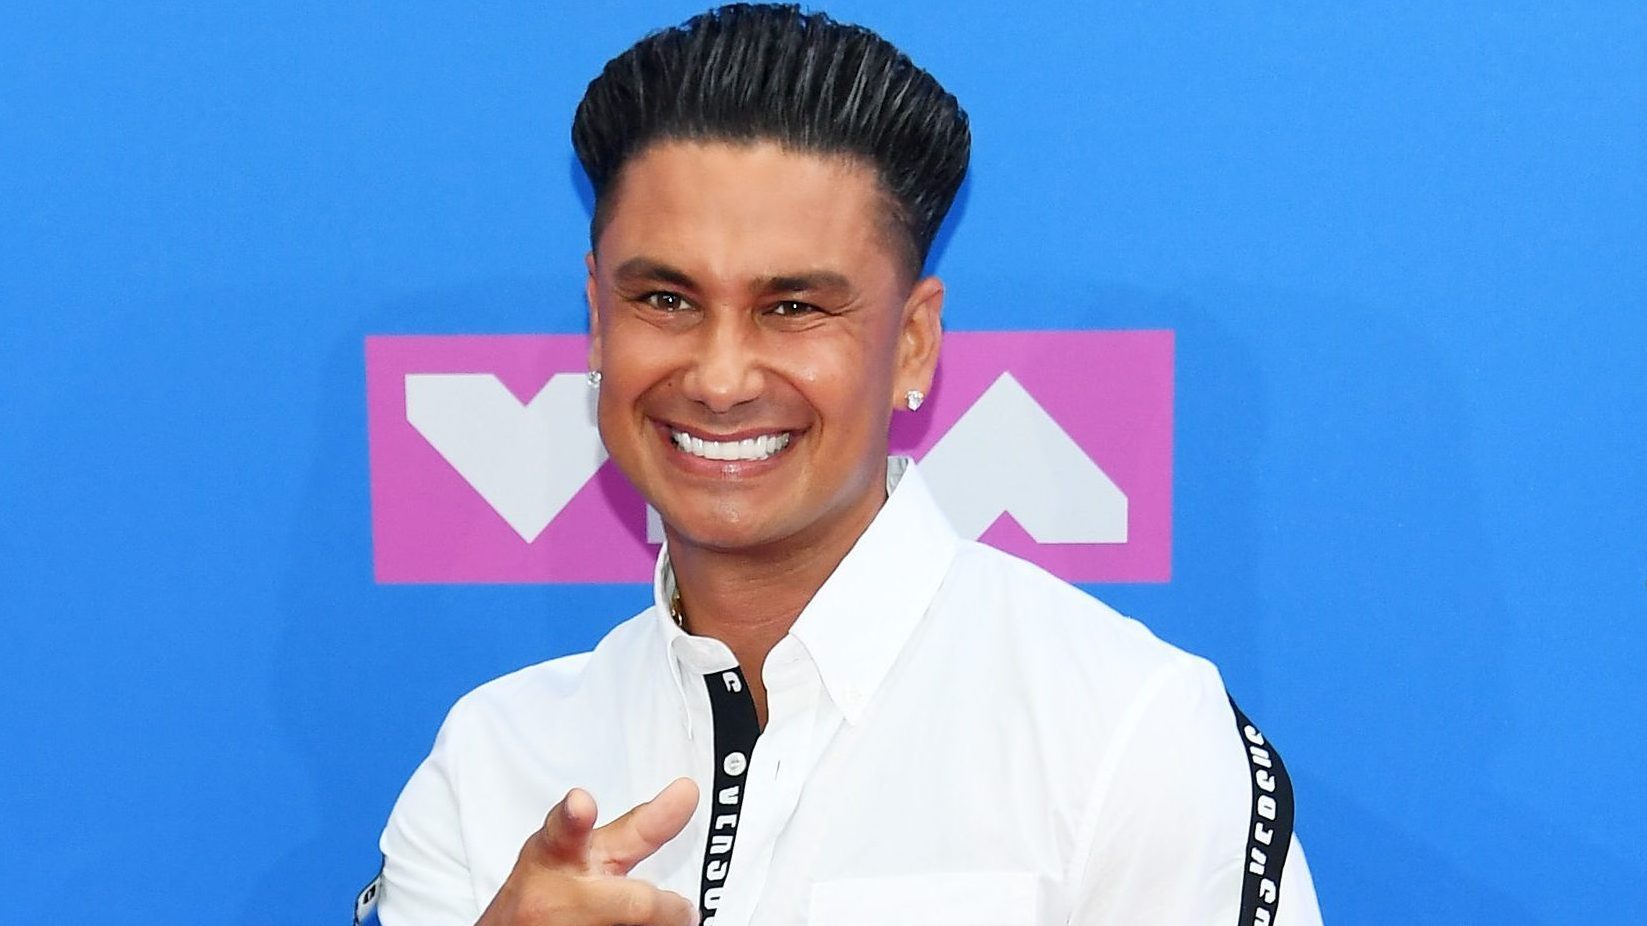 Amabella Sophia Markert, Pauly D's Daughter: 5 Fast Facts